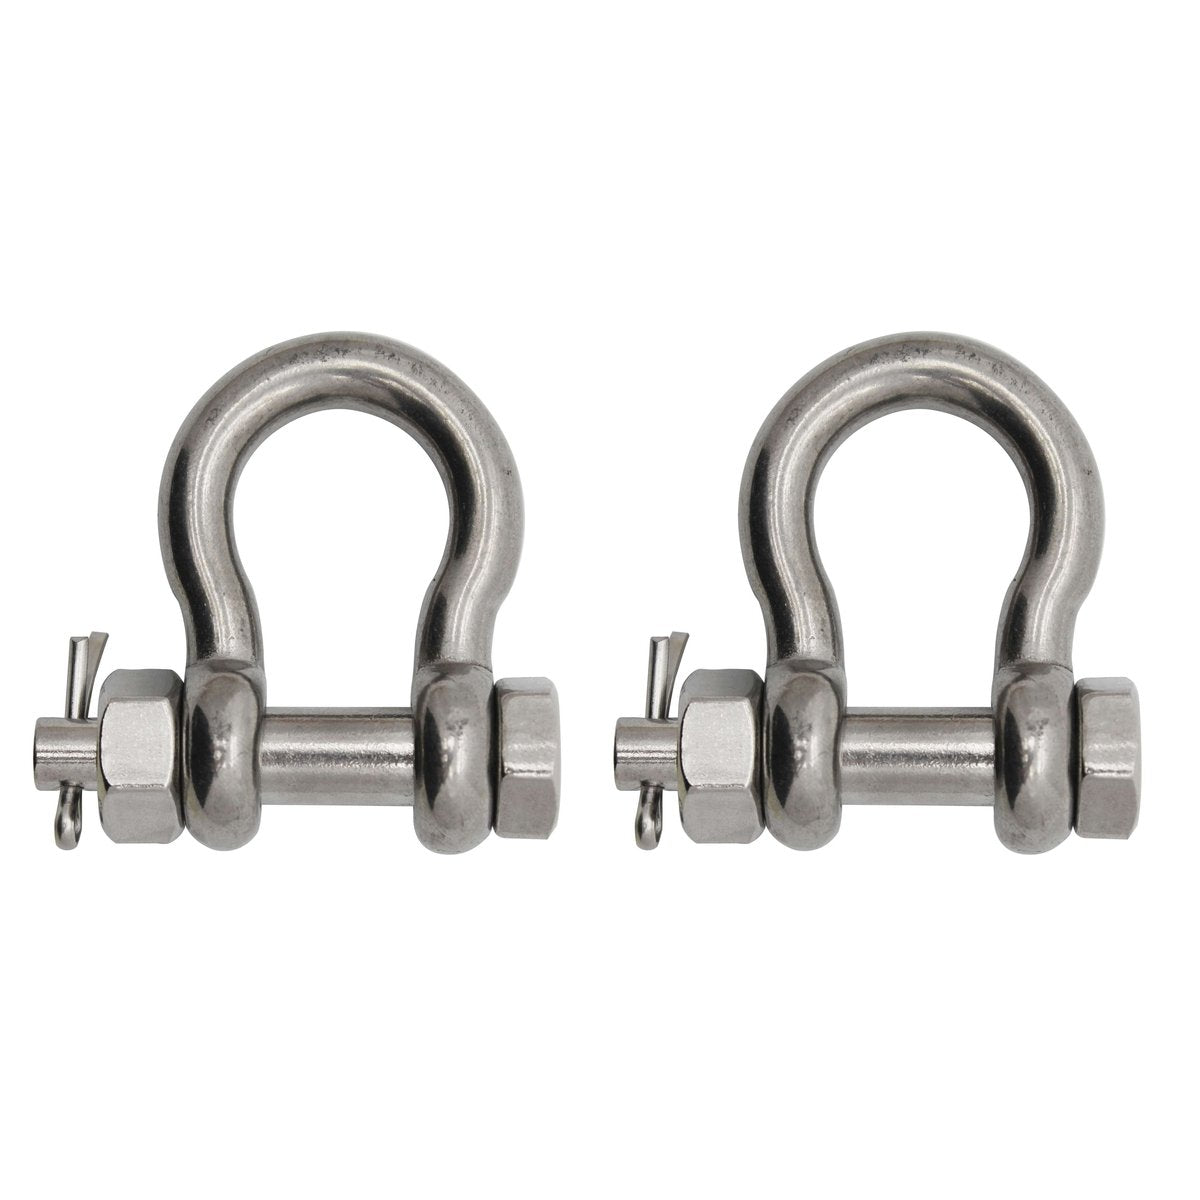 Extreme Max SS Bolt-Type Anchor Shackle 5/8" 2-pk #3006.8381.2